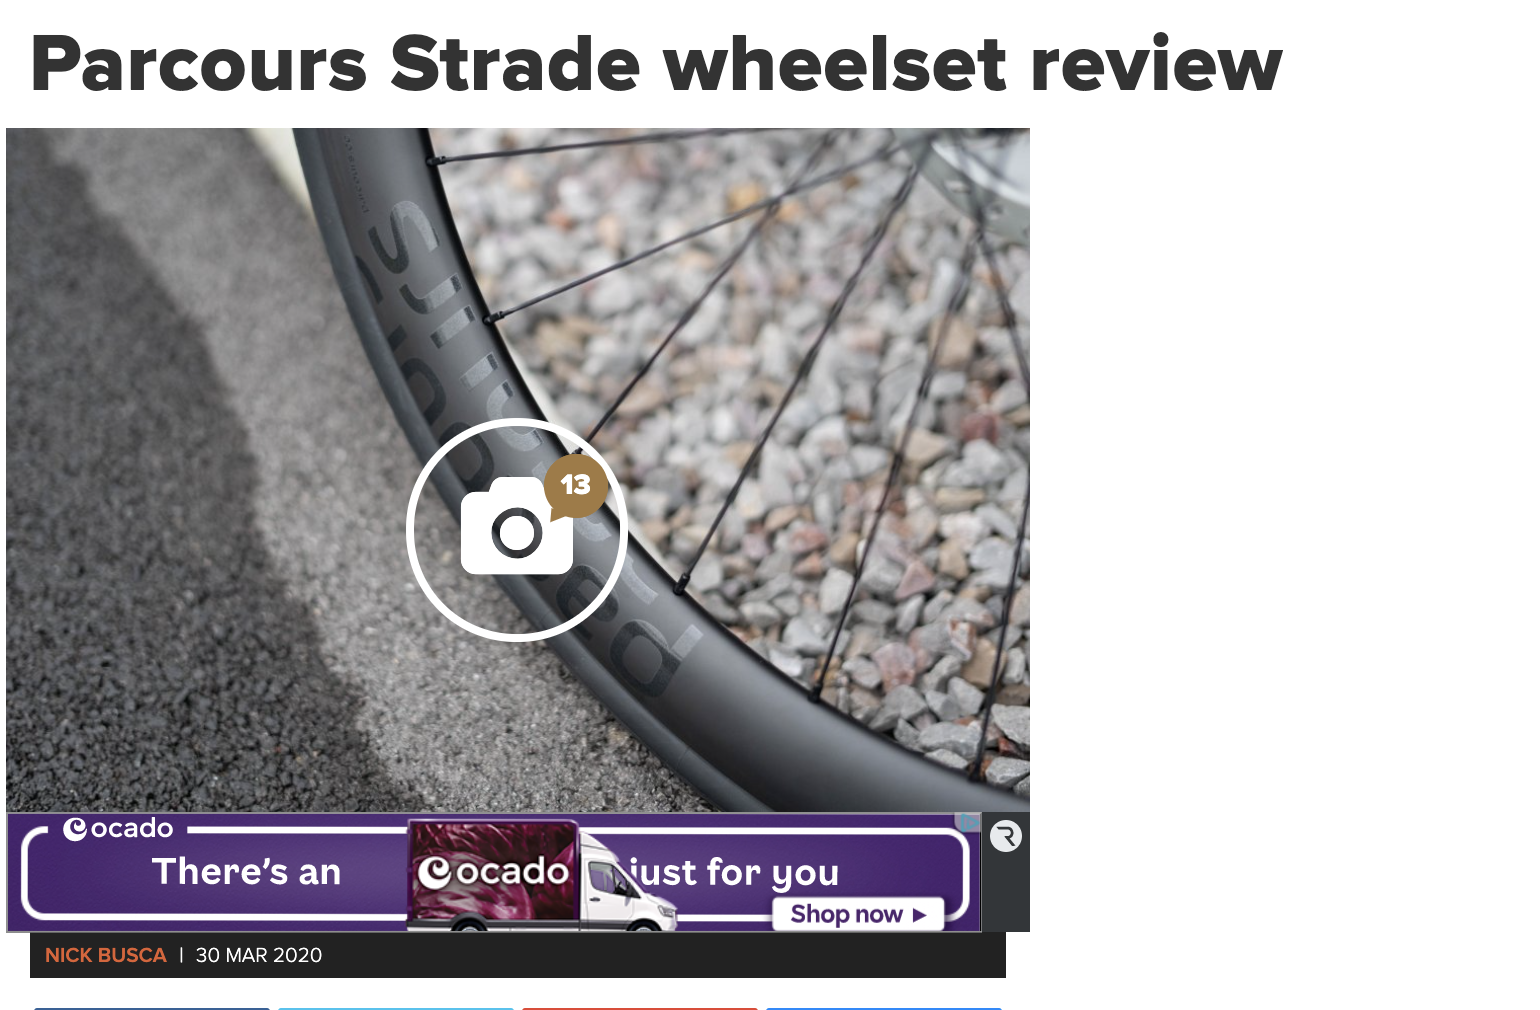 Parcours Strade wheelset review